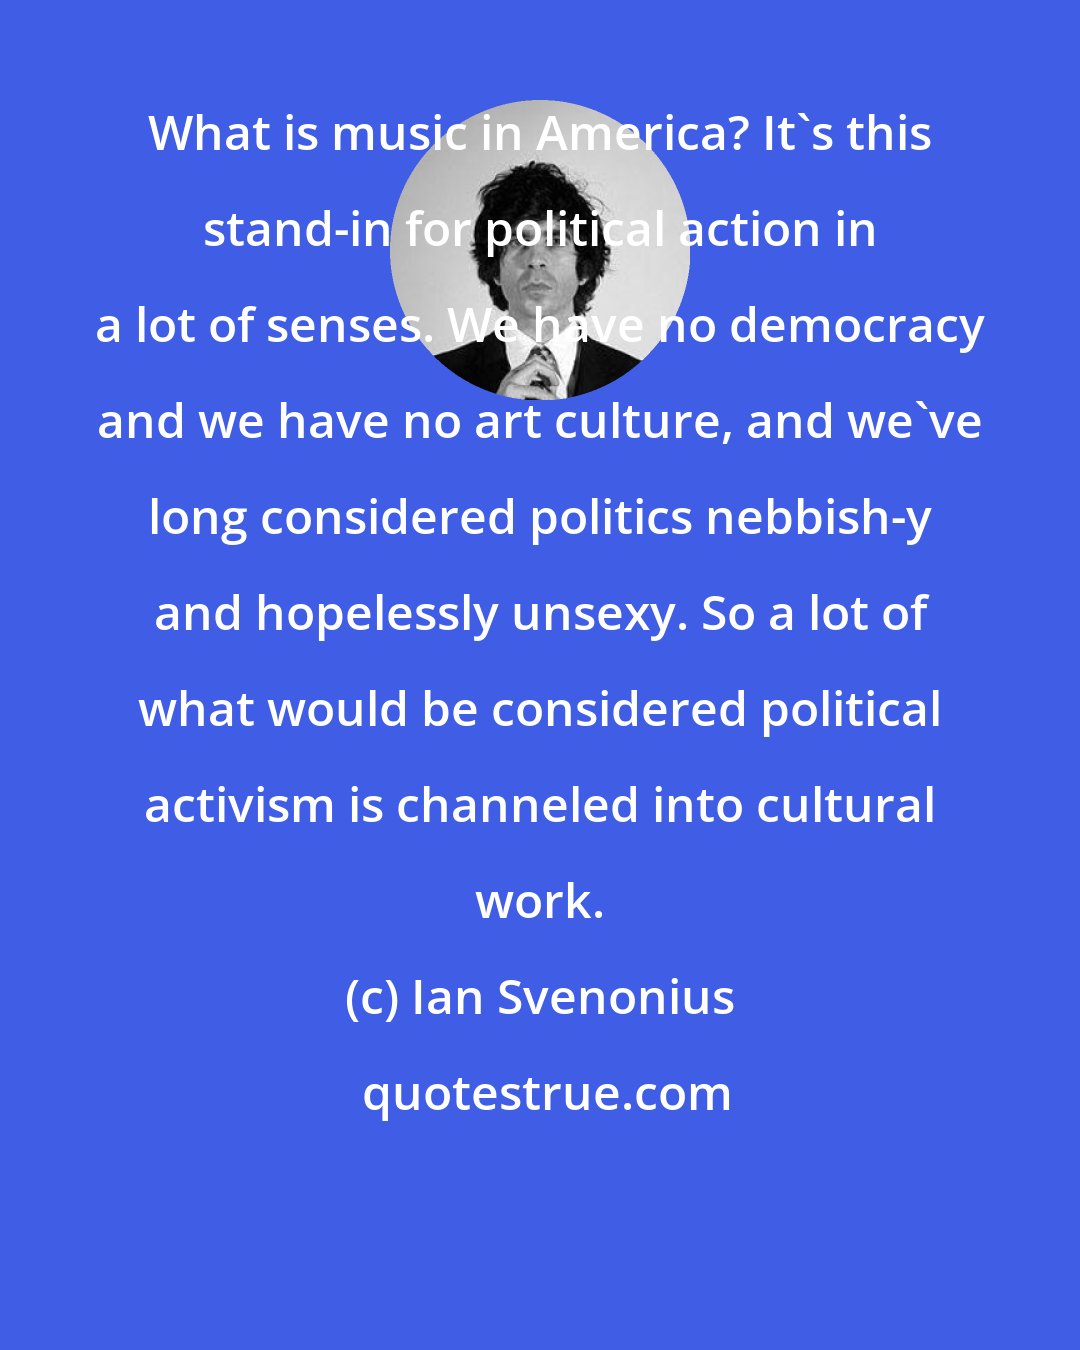 Ian Svenonius: What is music in America? It's this stand-in for political action in a lot of senses. We have no democracy and we have no art culture, and we've long considered politics nebbish-y and hopelessly unsexy. So a lot of what would be considered political activism is channeled into cultural work.